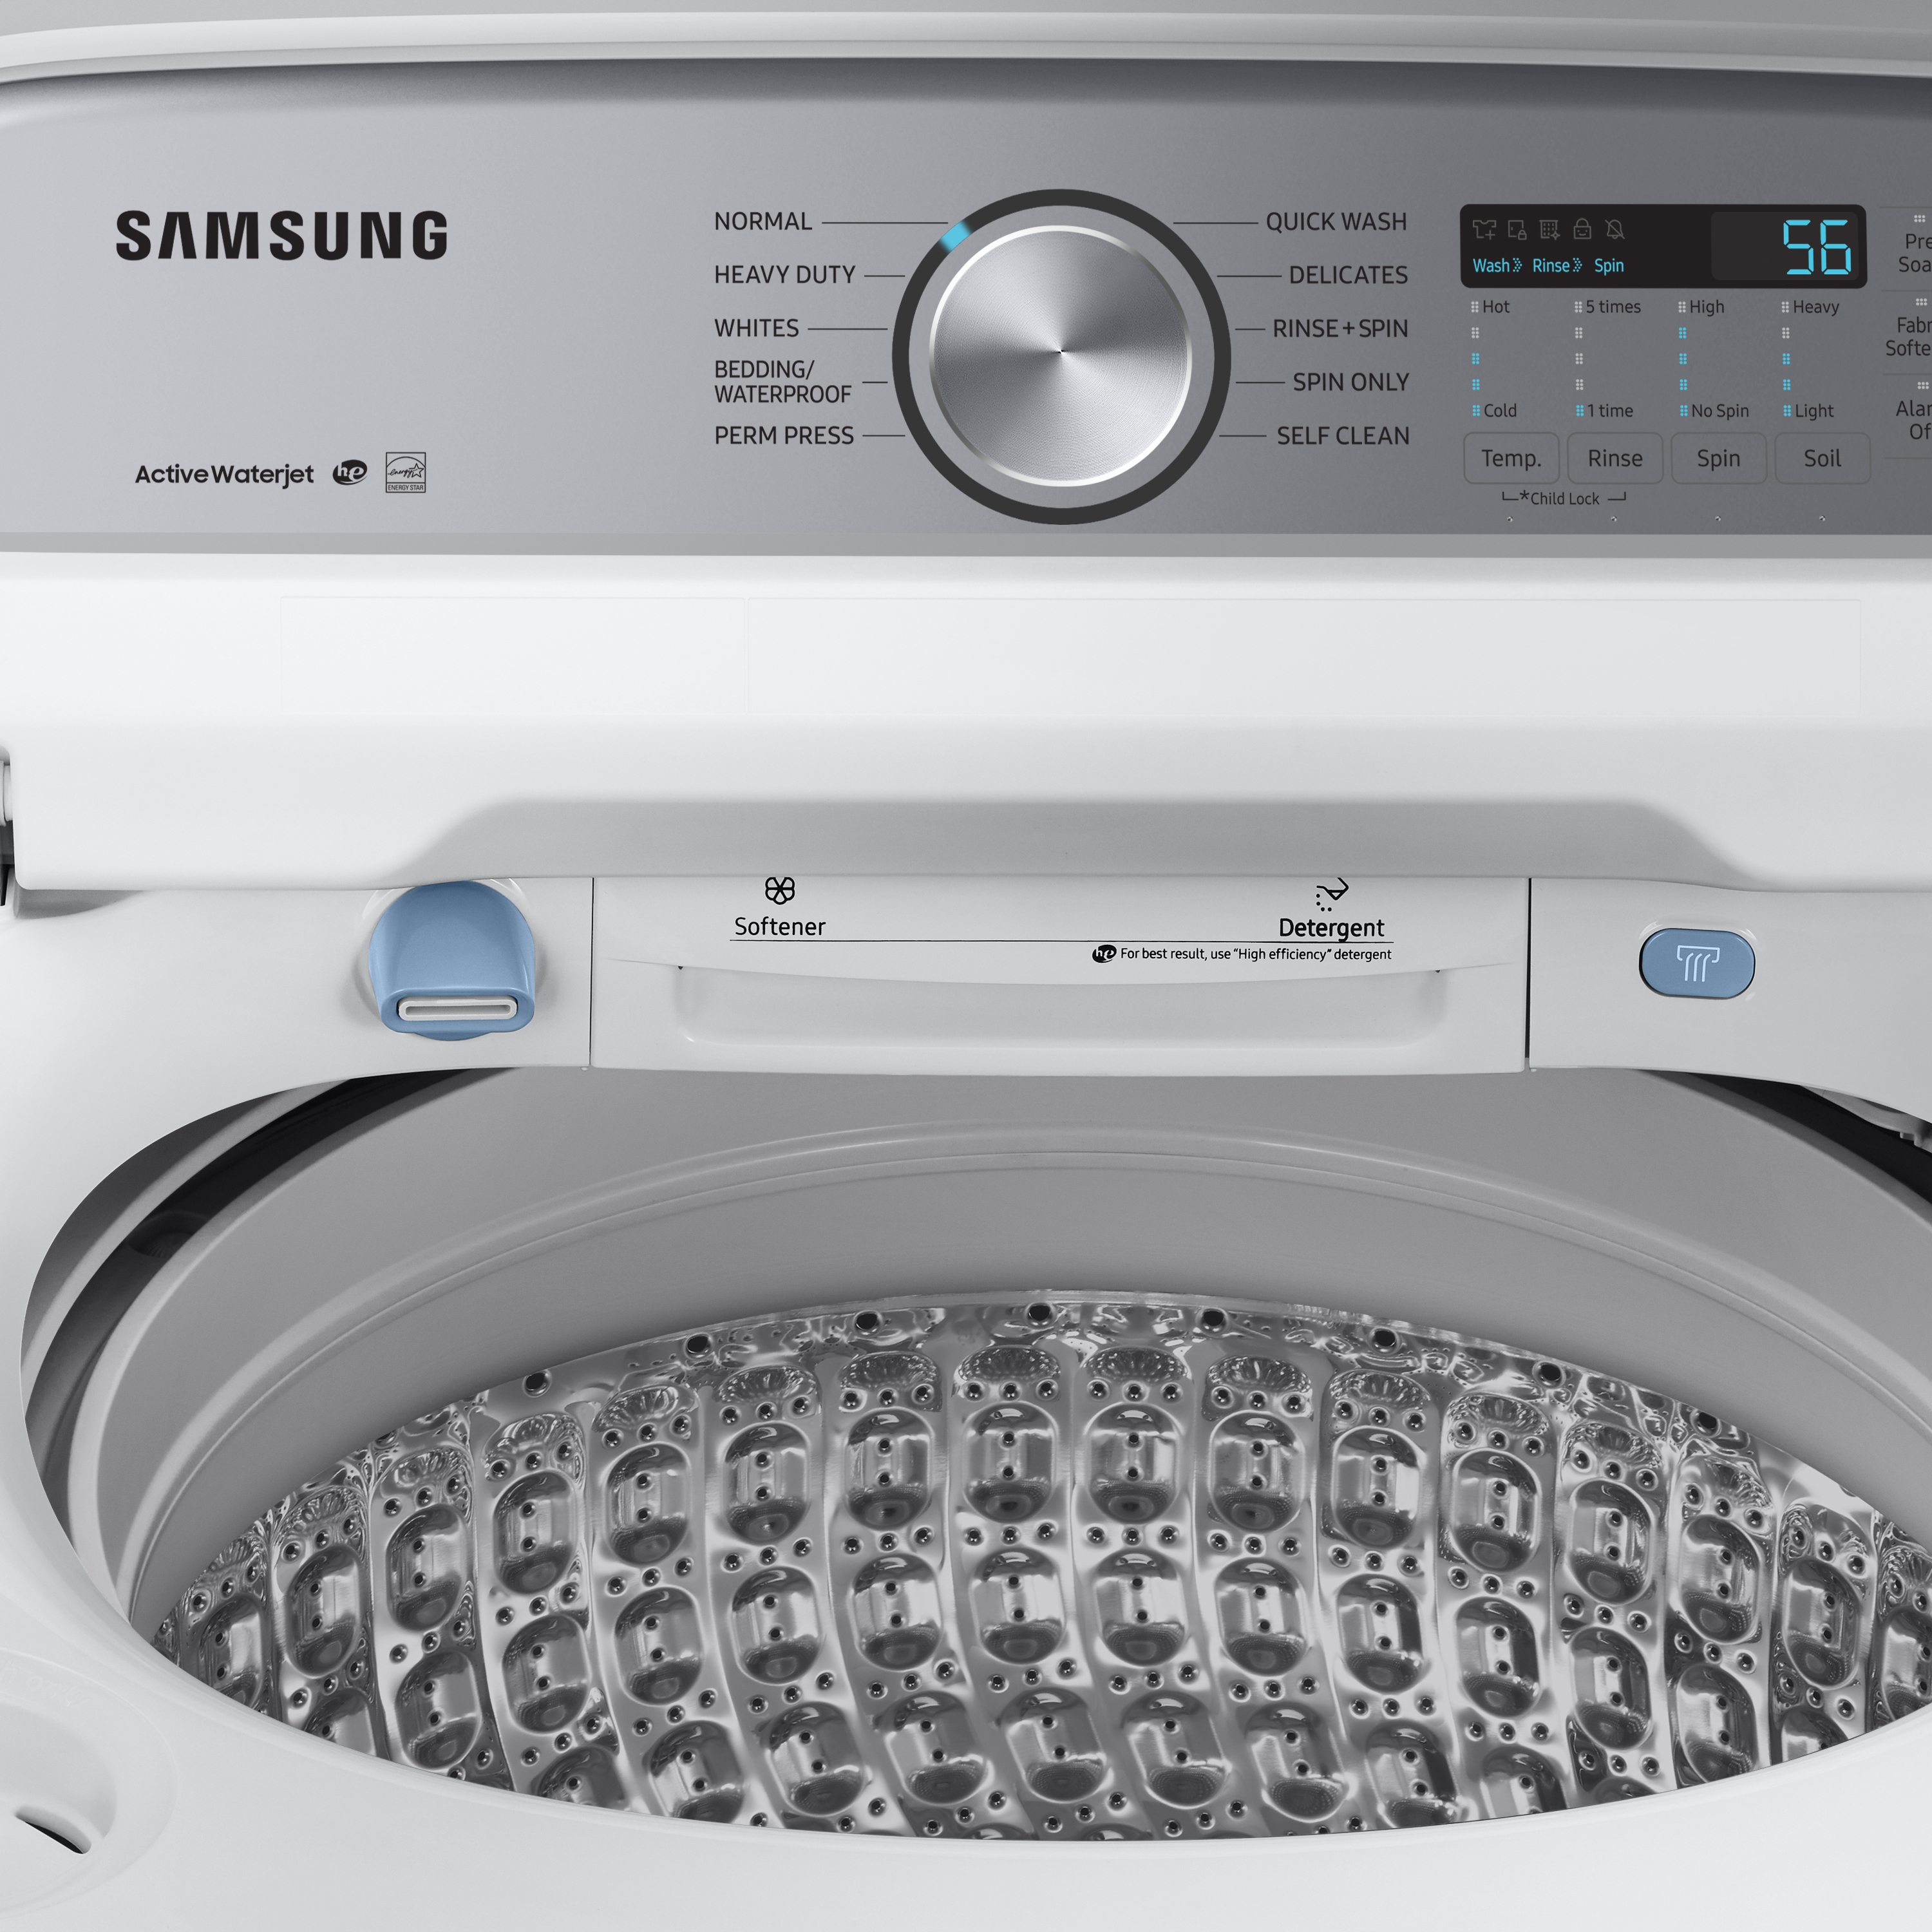 Agitator in White Top Active with Washers Samsung ActiveWave™ US Capacity Washer ft. WA49B5205AW/US | and cu. - Load WaterJet 4.9